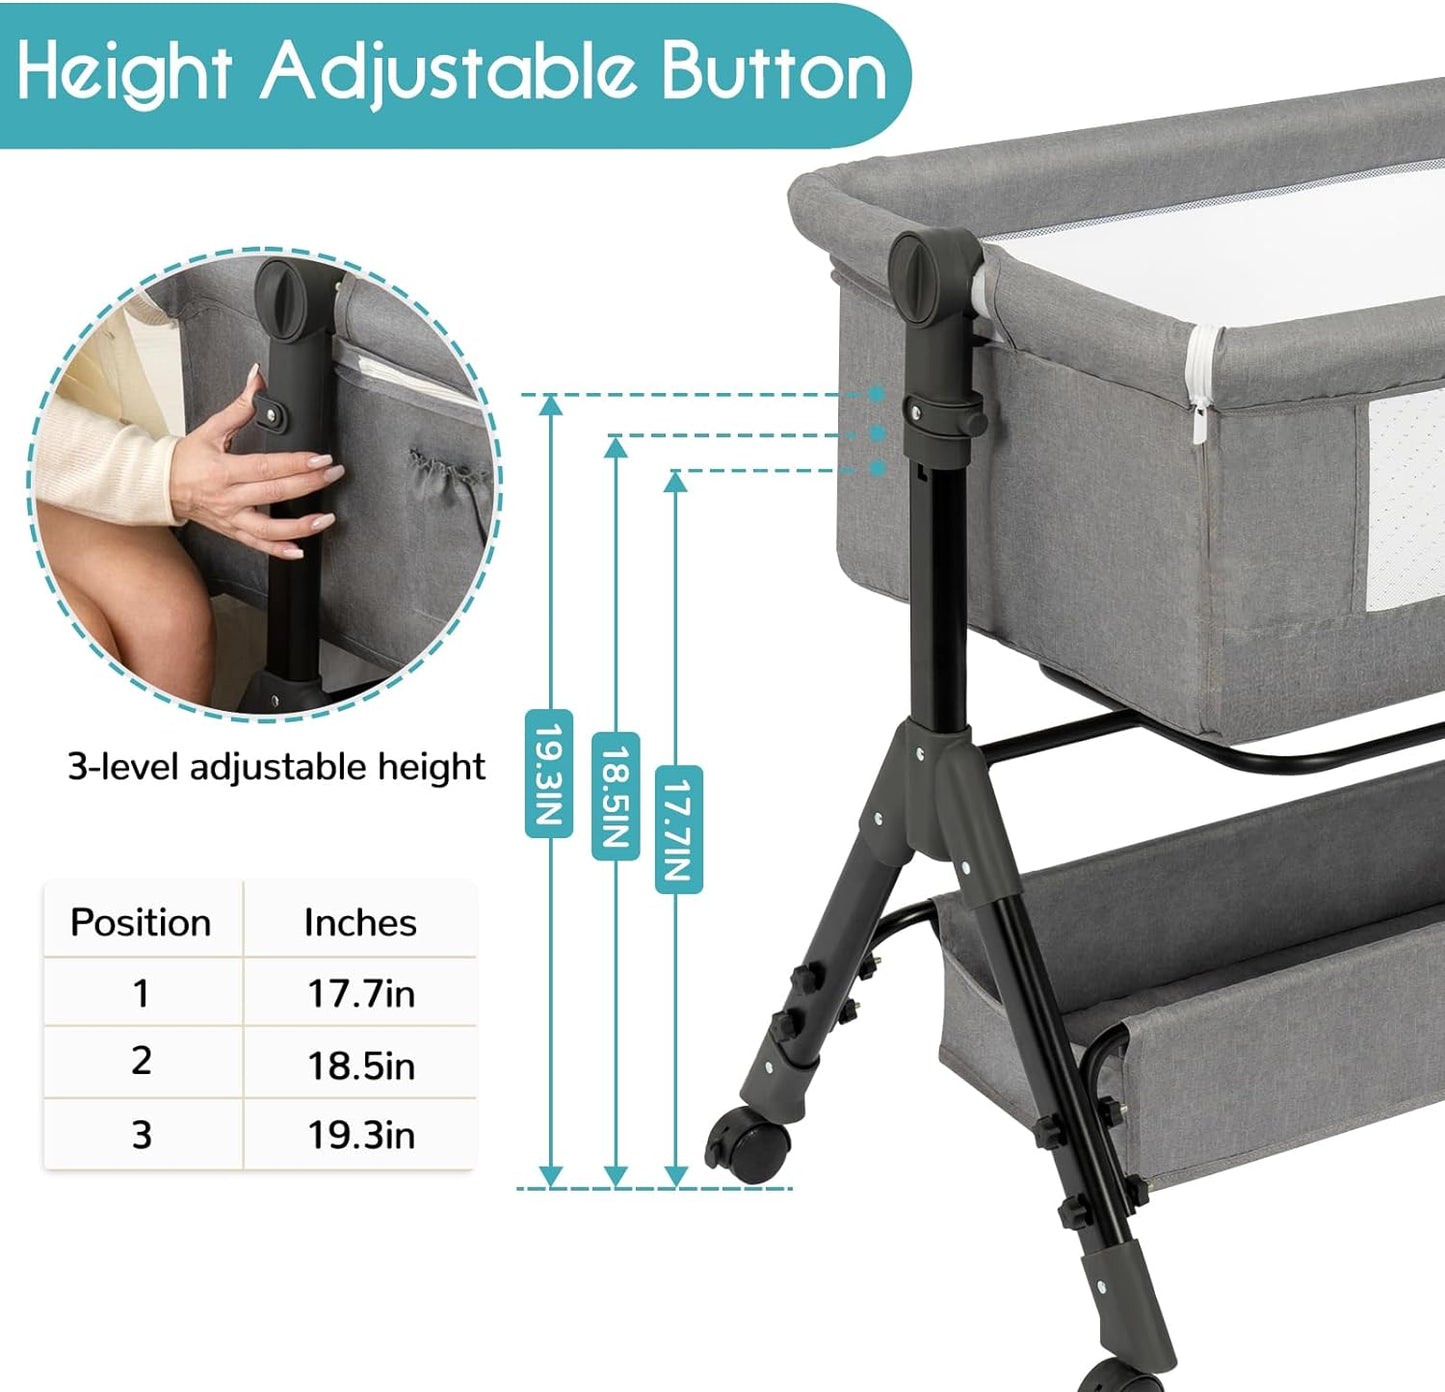 Foalom 3 in 1 Baby Bassinet, Bedside Sleeper with Storage Basket and Wheels, Bedside Crib for Baby, Adjustable and Movable Baby Cradle with Mosquito Nets, Easy Folding Baby Bed (Grey)